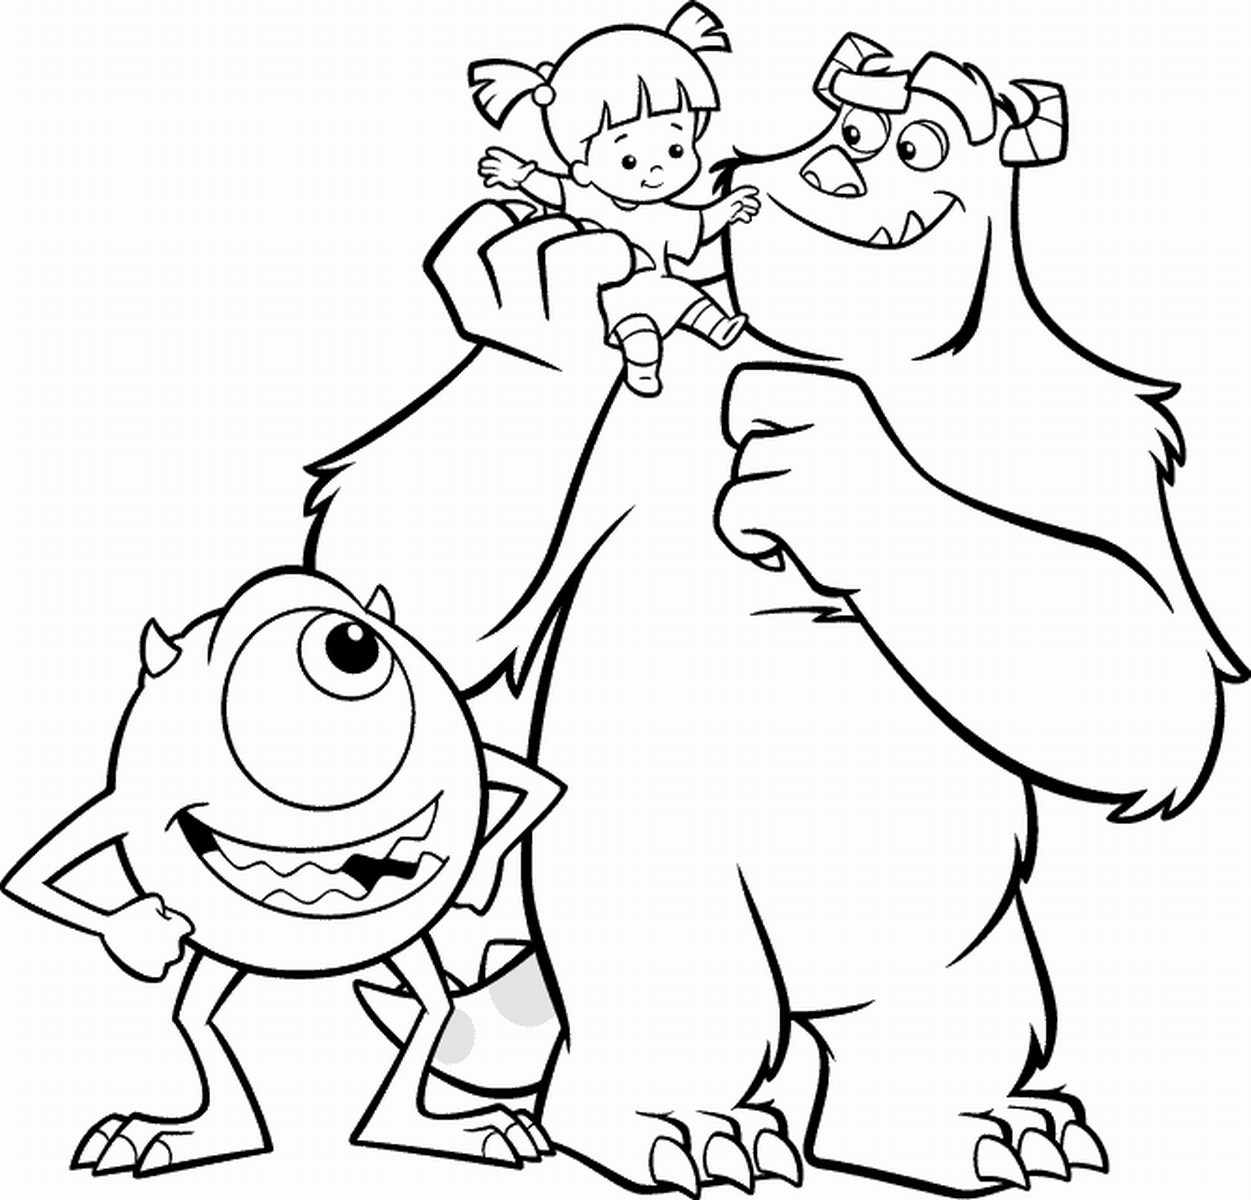 Monster Coloring Pages for boys monsters_cl1 Printable 2020 0655 Coloring4free